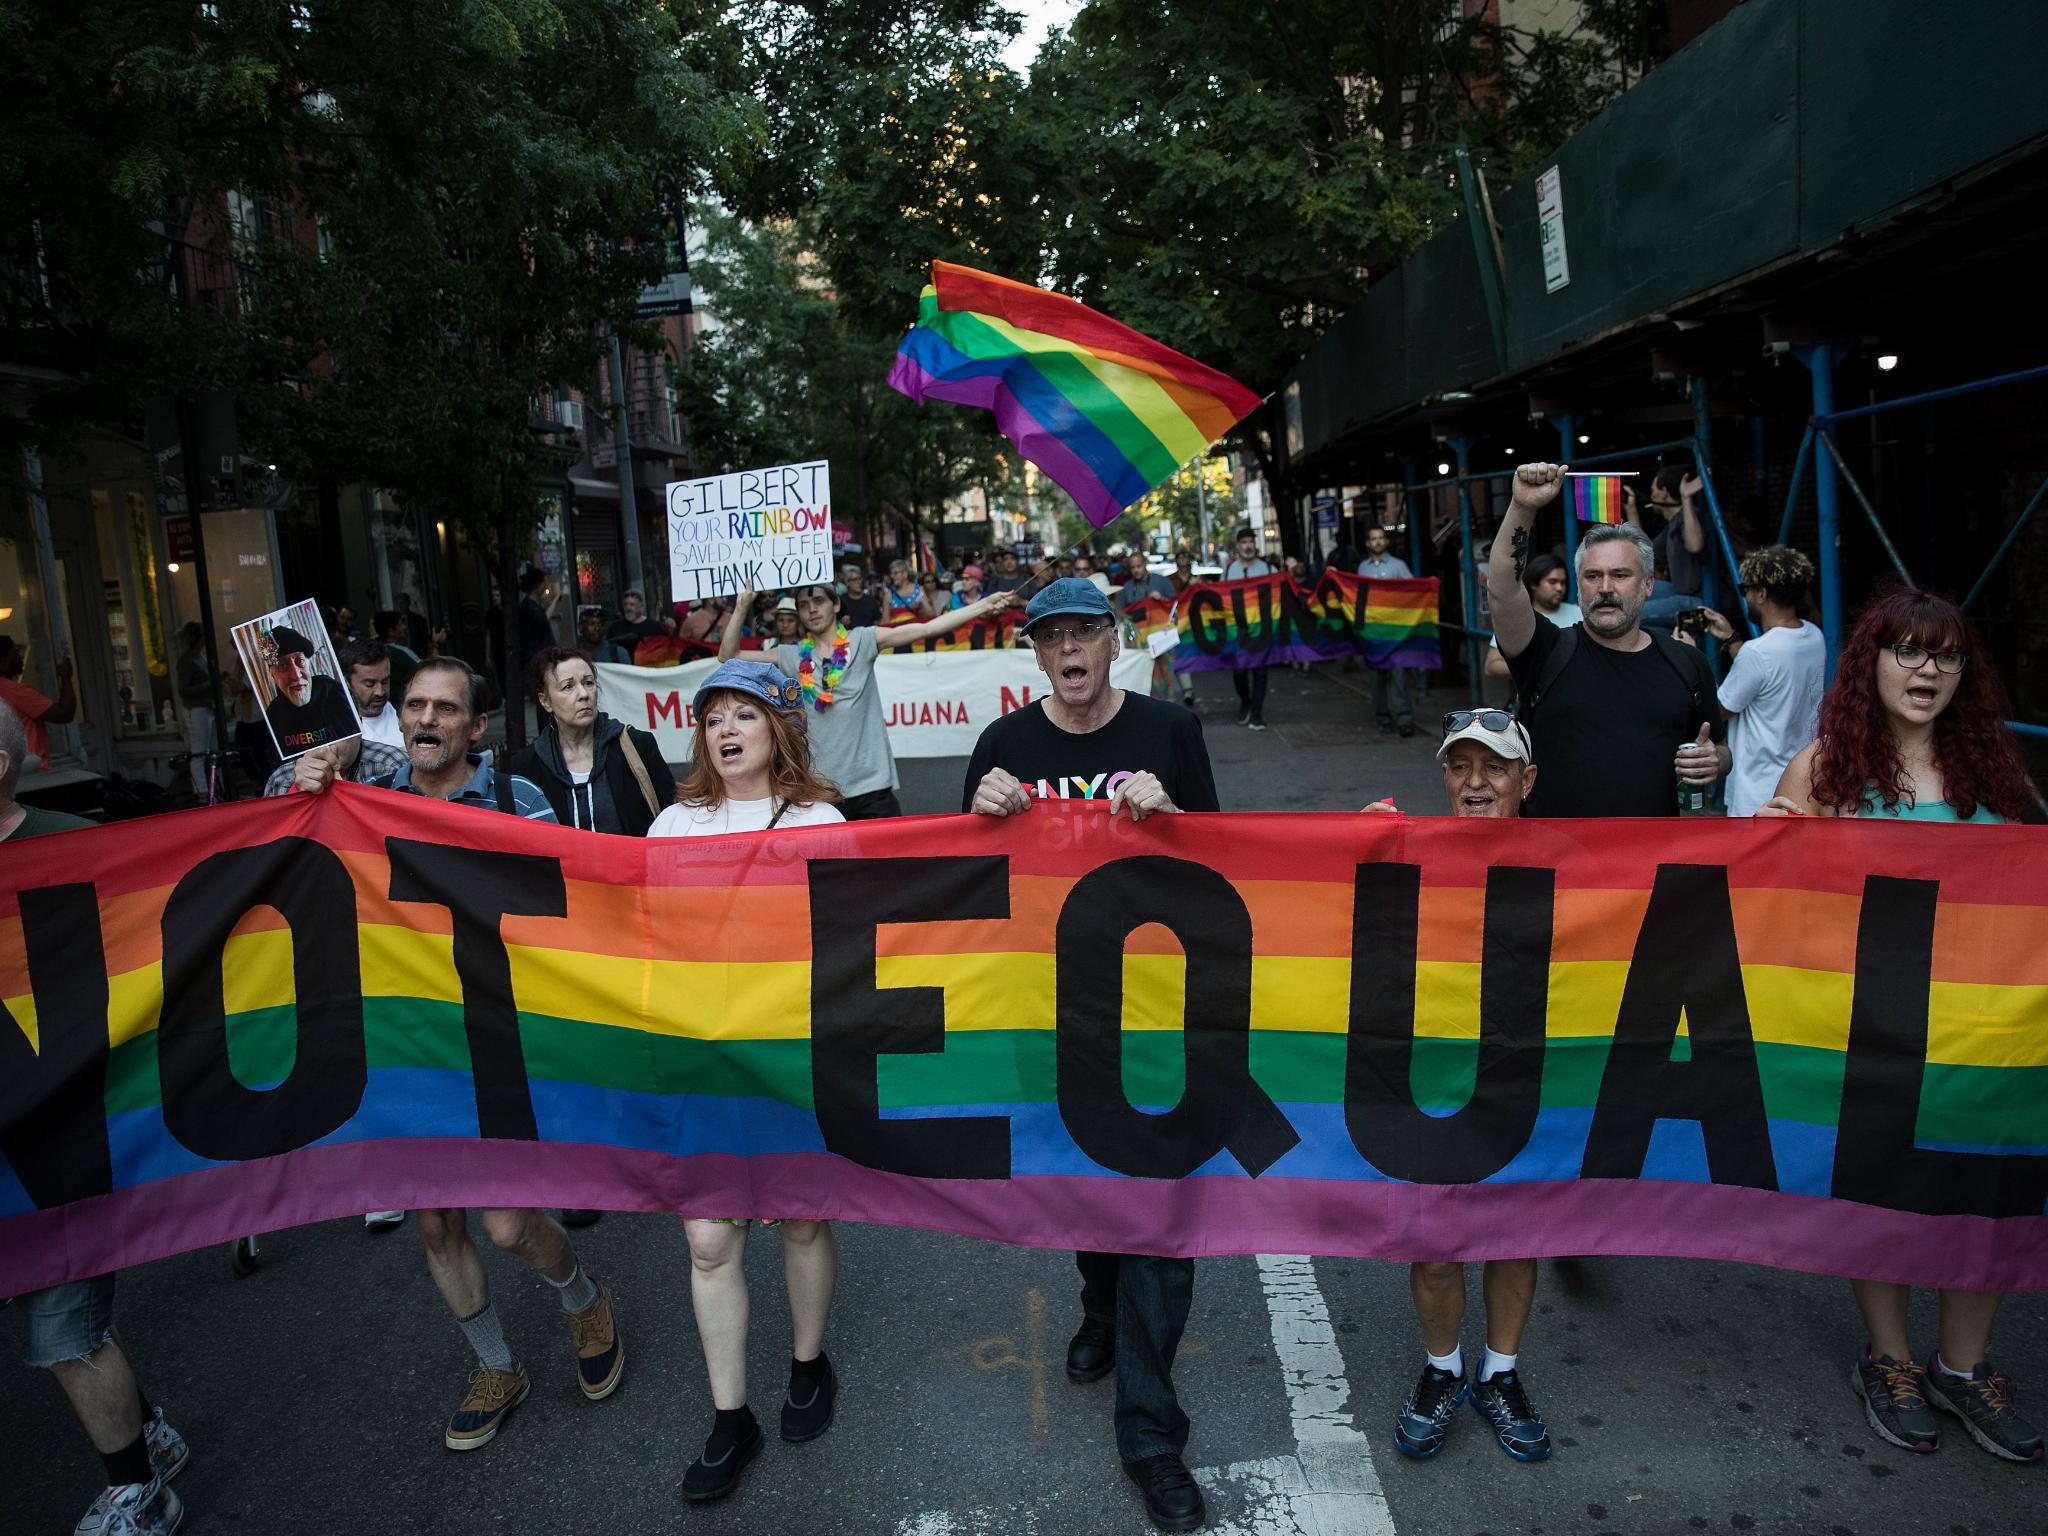 Participants march during a Flag Day 'Raise the Rainbow' rally, 14 June 2017 in New York City. The event honored LGBT rainbow flag creator Gilbert Baker, who died in March 2017.